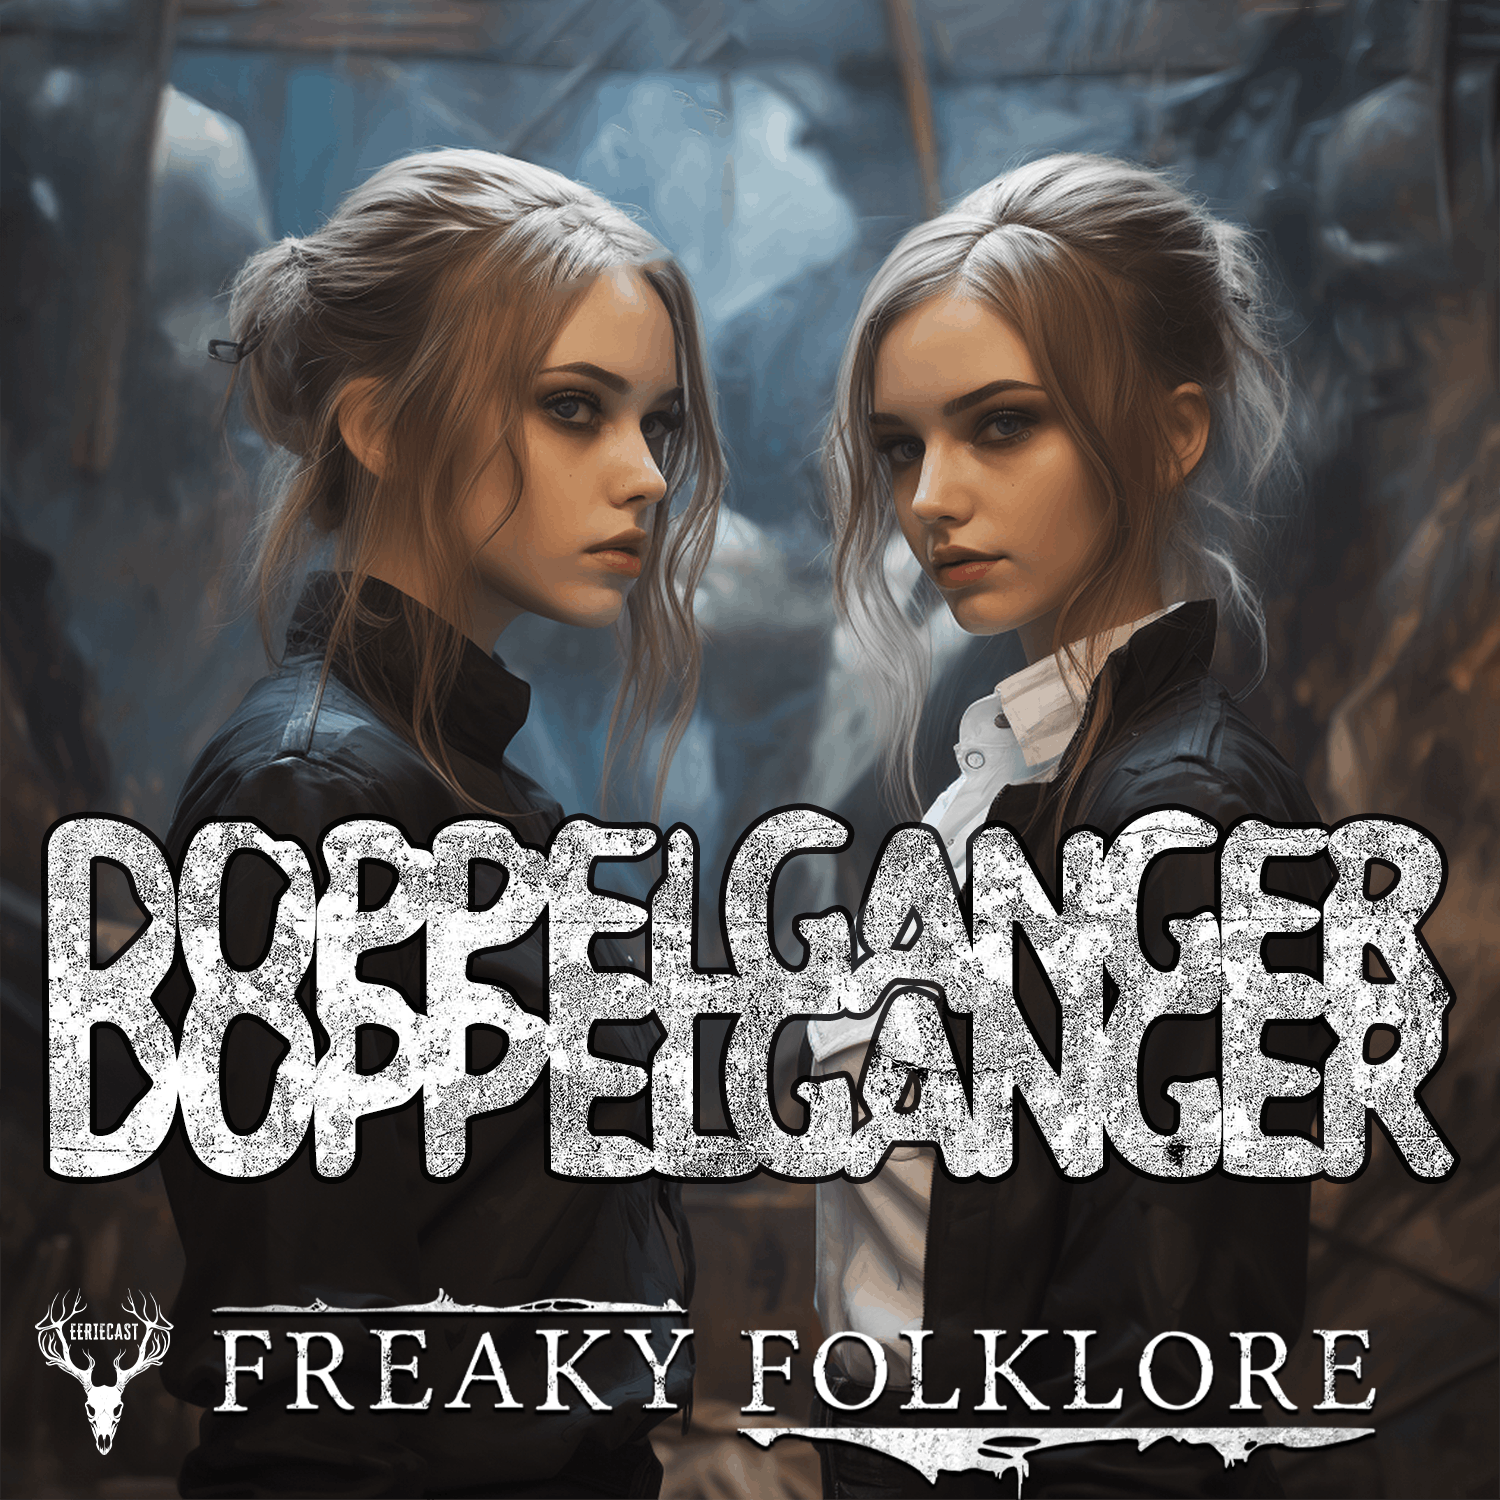 Listen to Freaky Folklore podcast